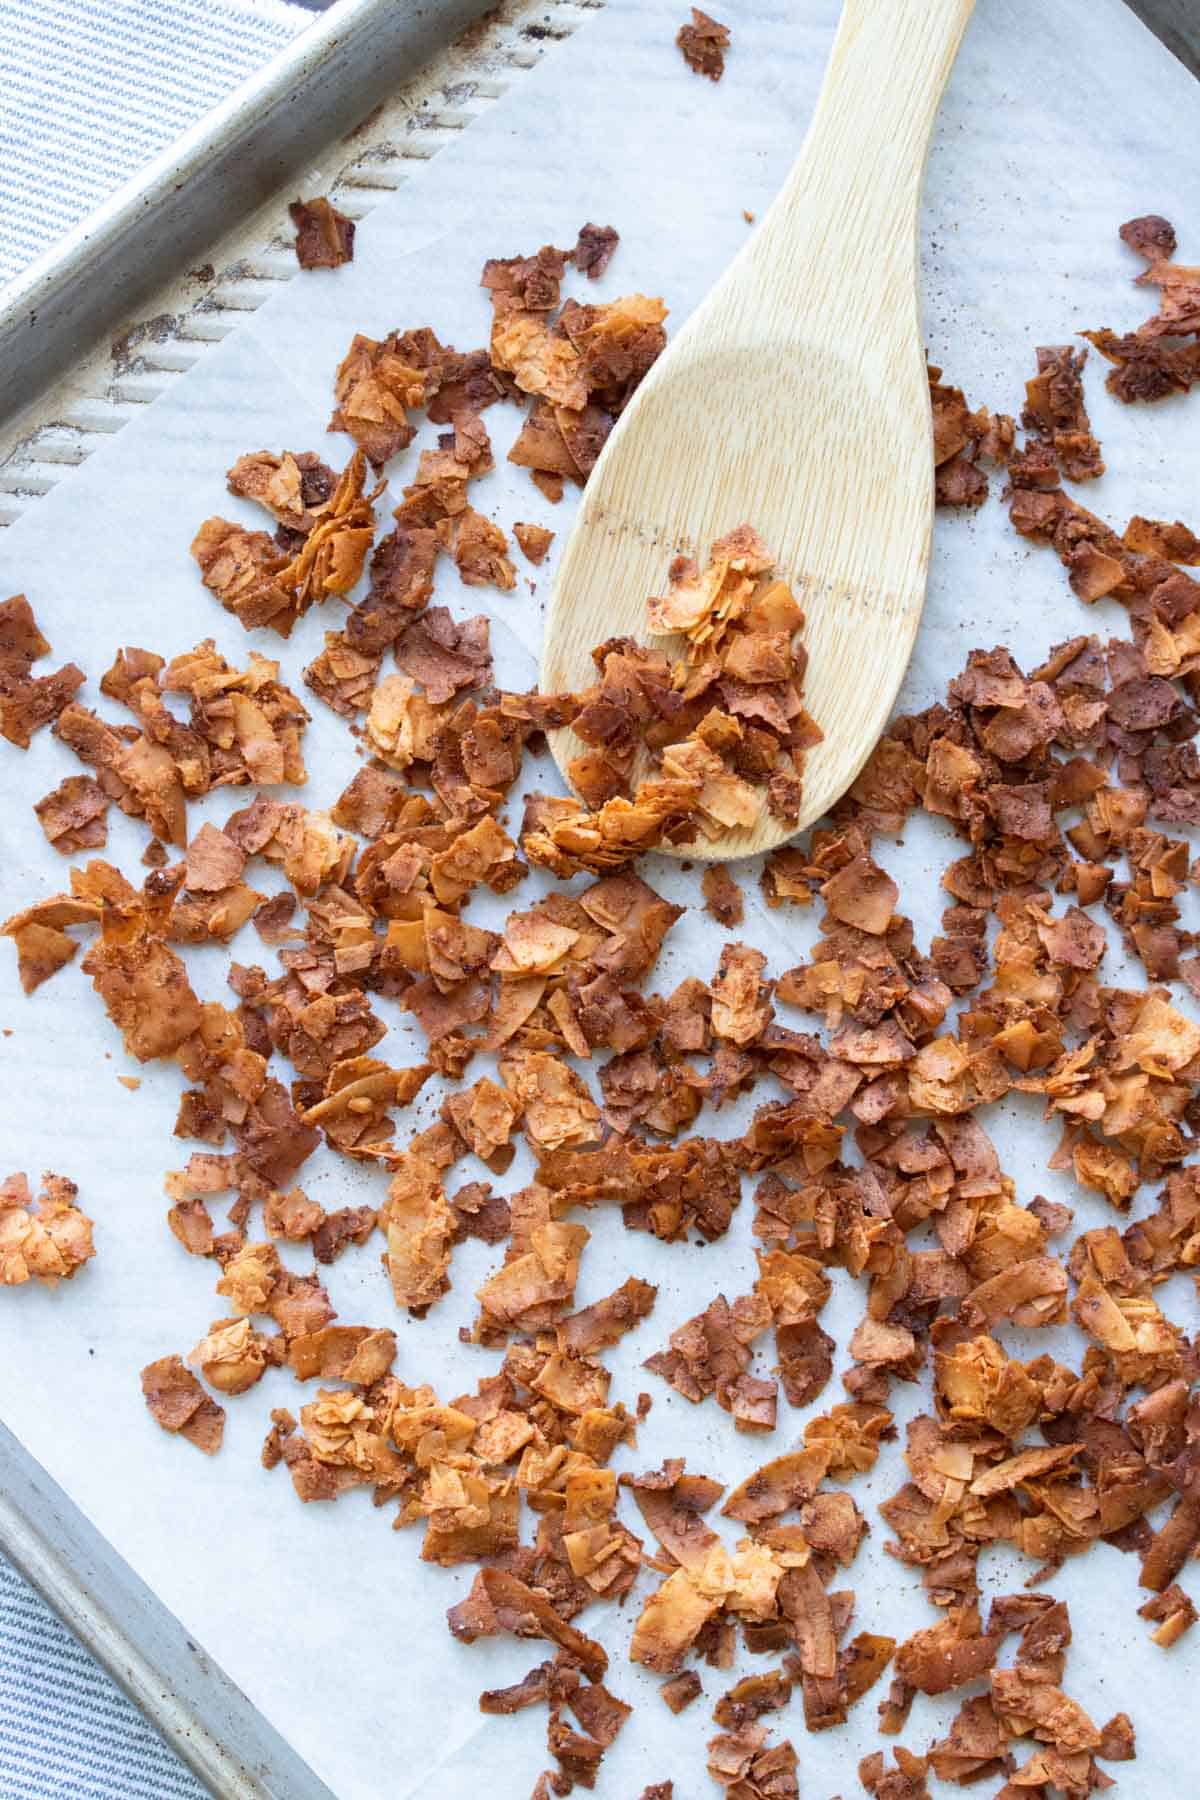 Wooden spoon stirring coconut bacon pieces on baking sheet